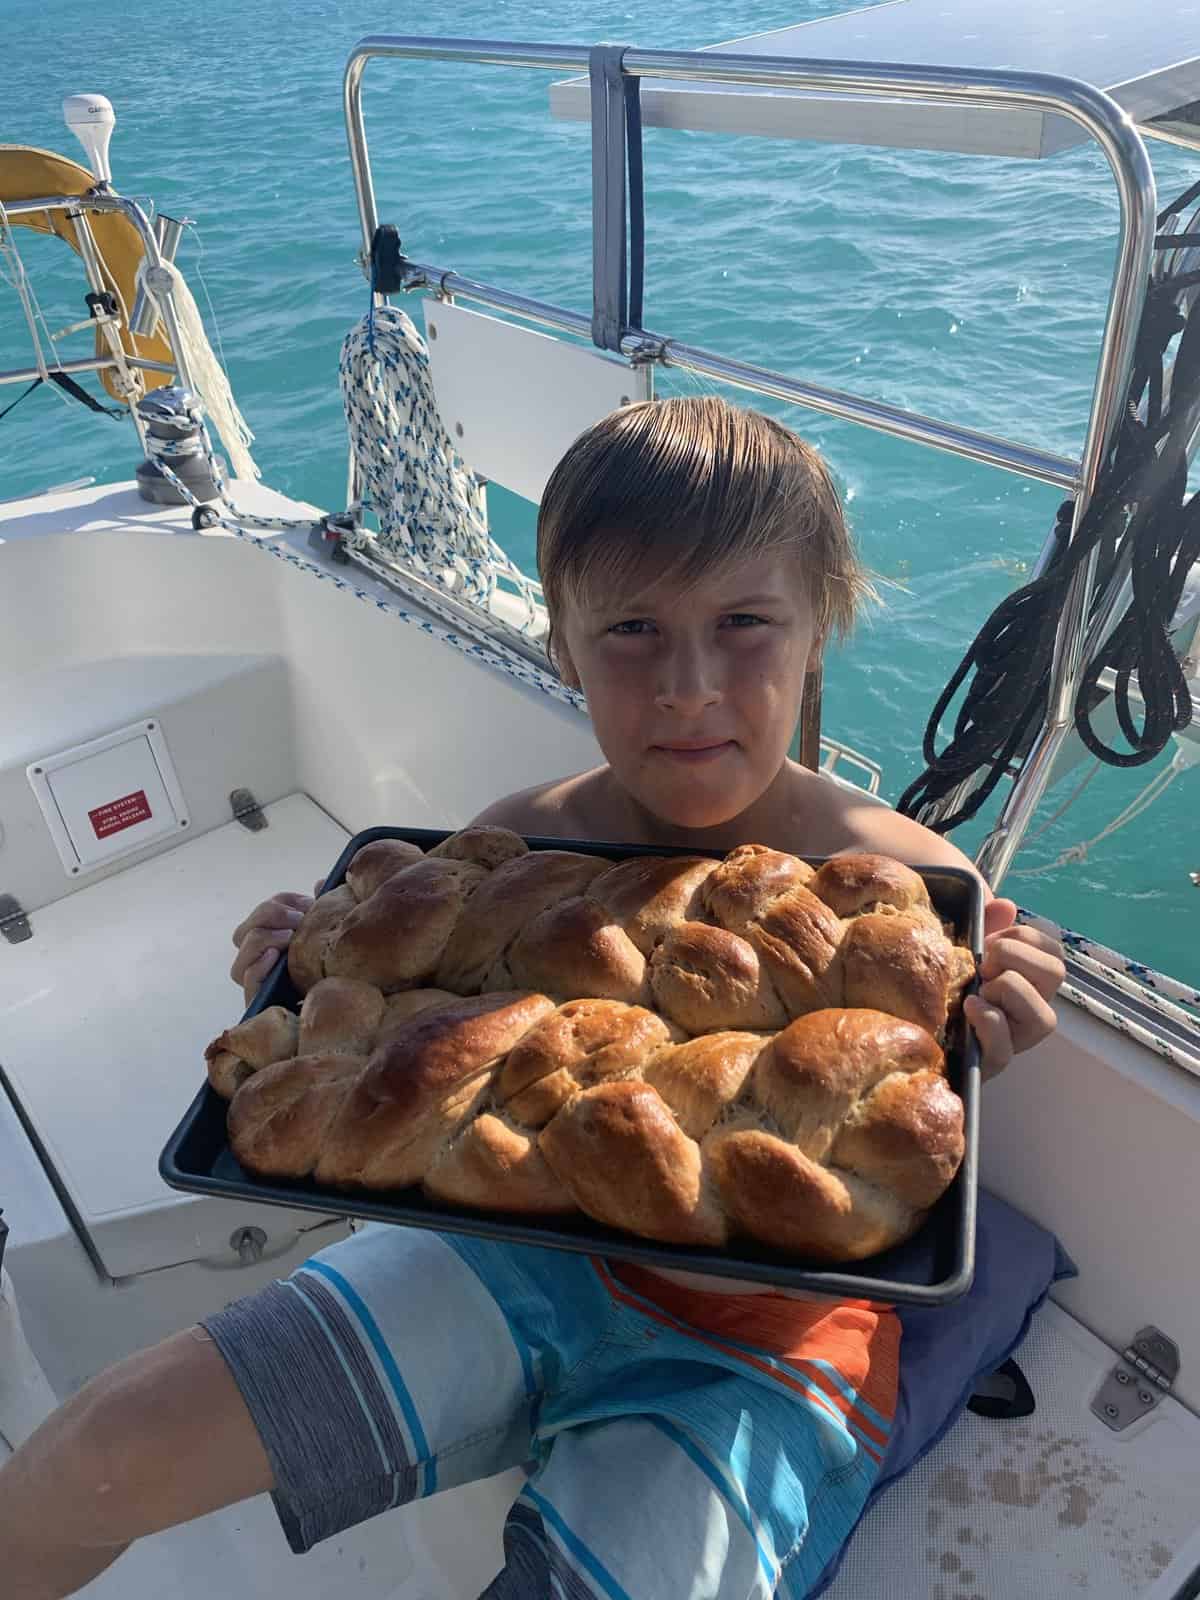 a boy holding a pan with home-baked braided bread, on a sailboat.